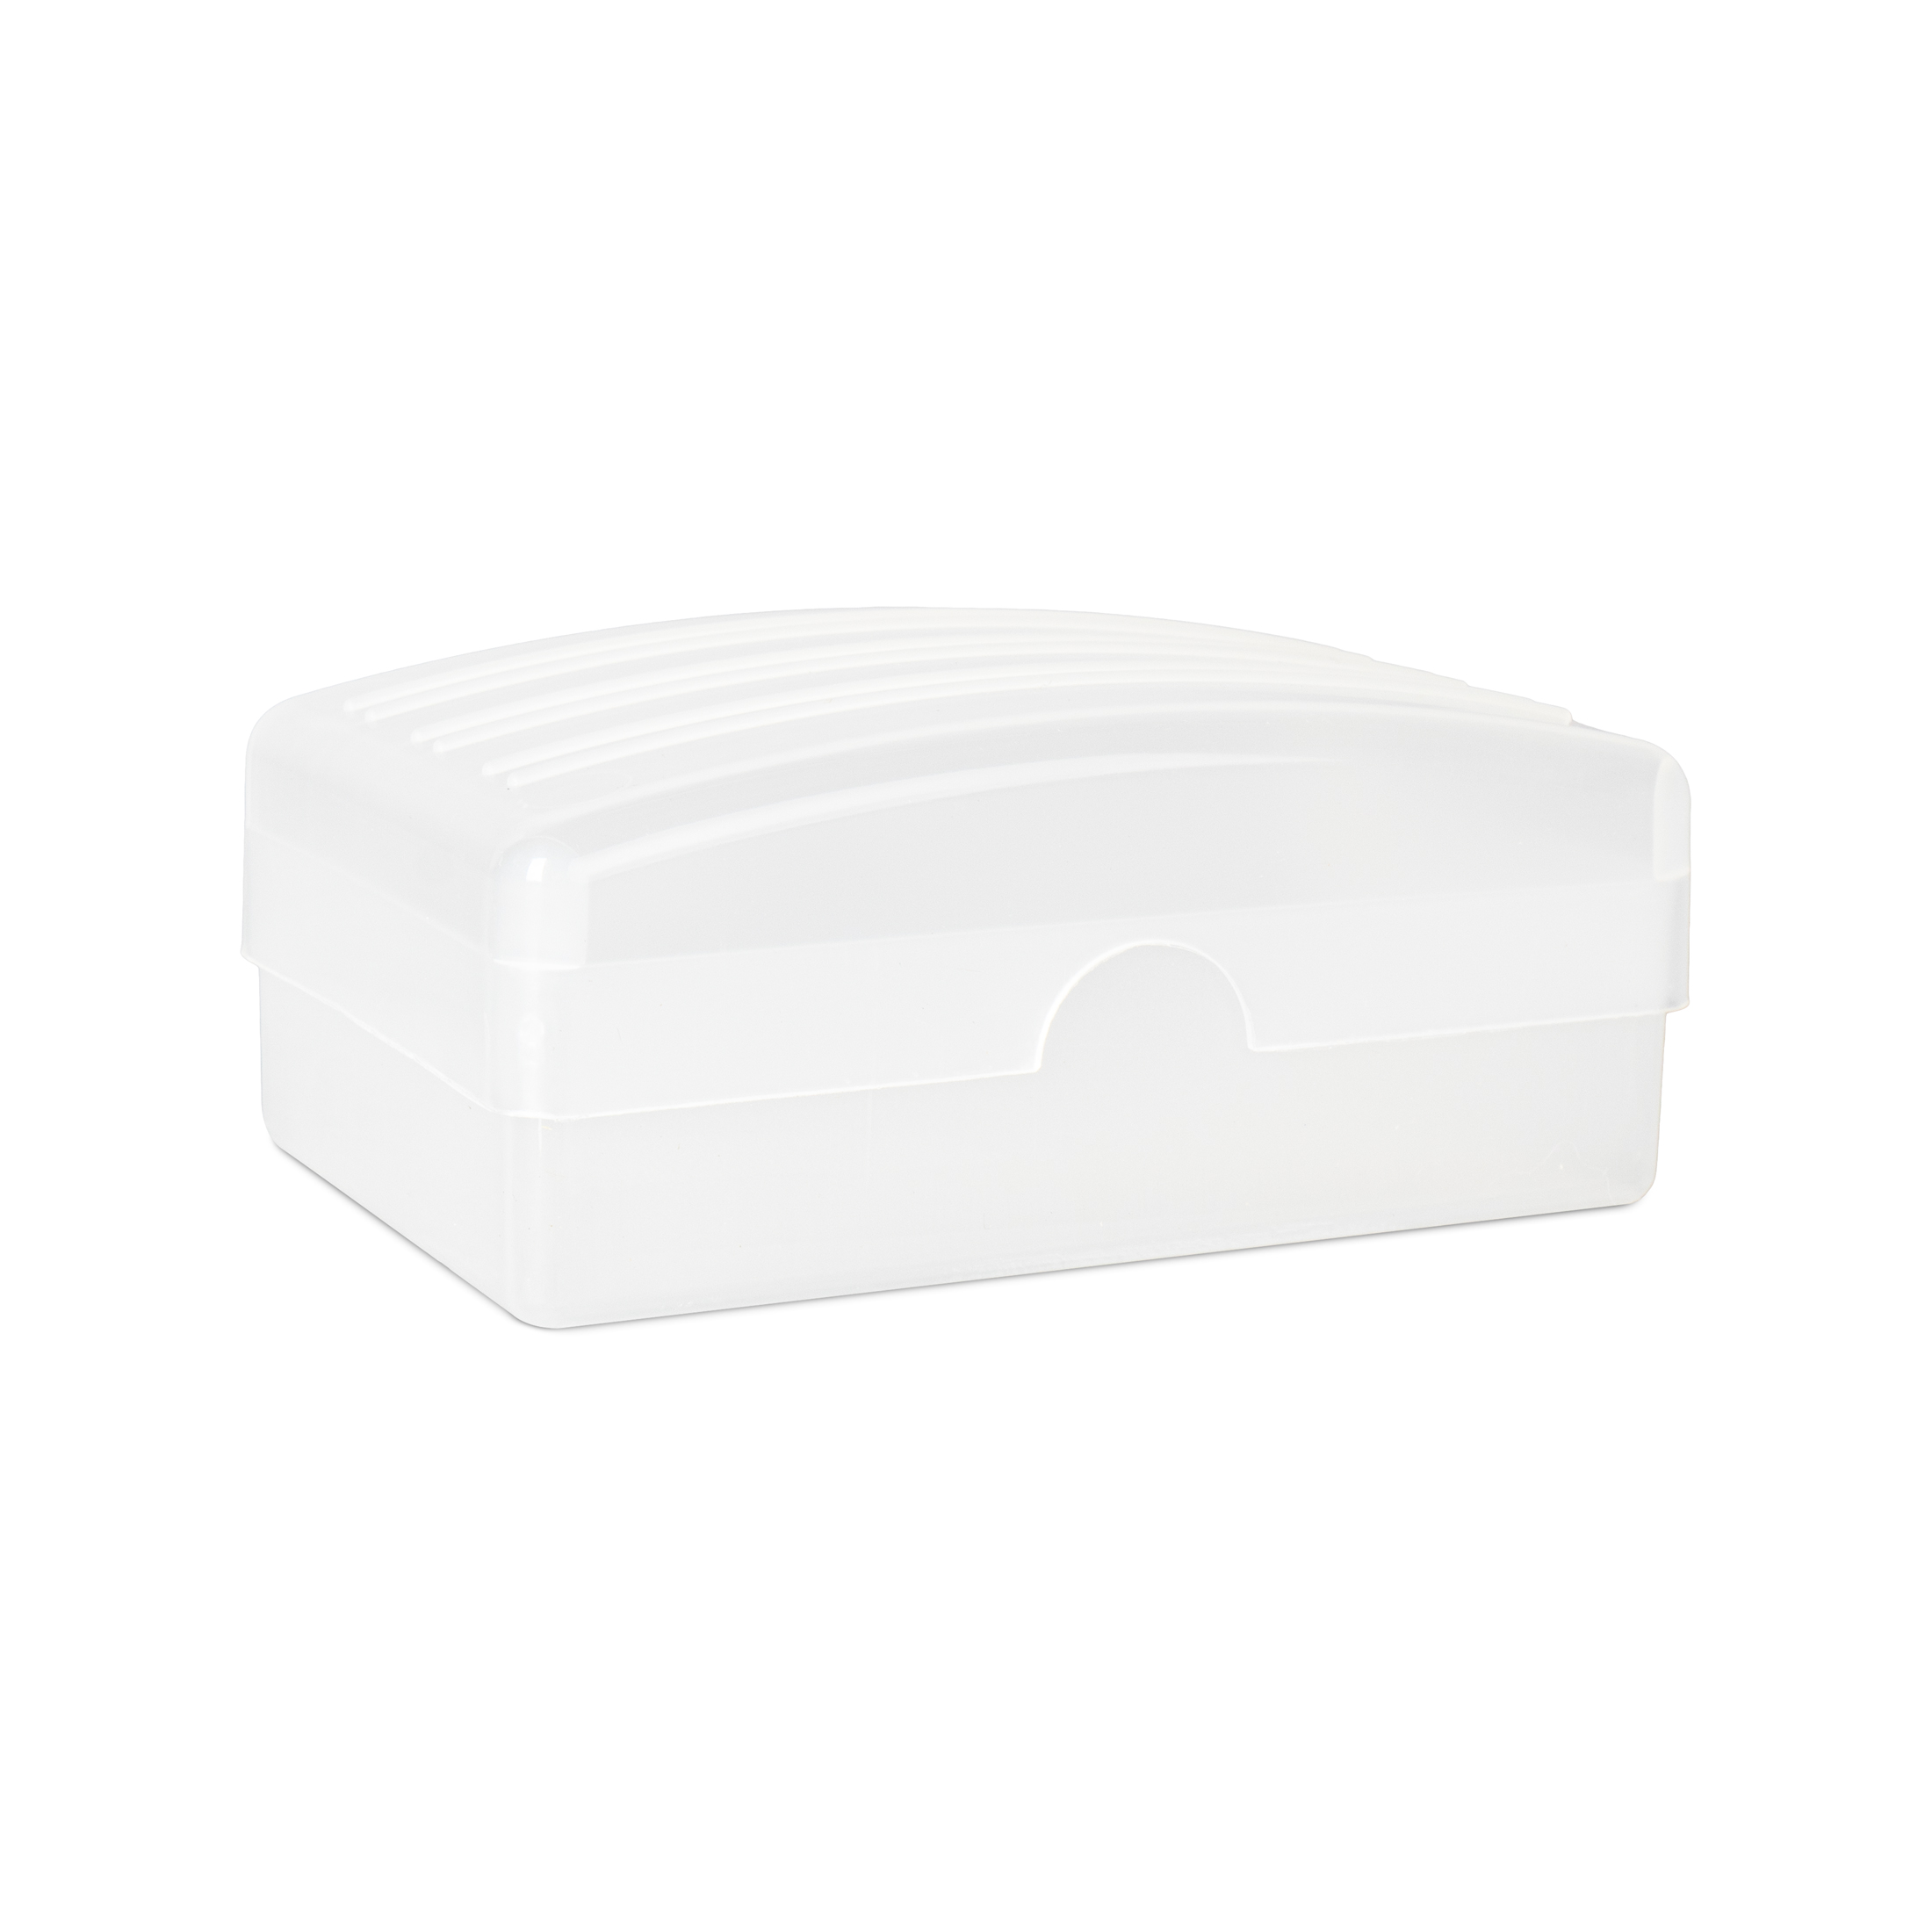 Bar Soap Holders Products, Supplies and Equipment